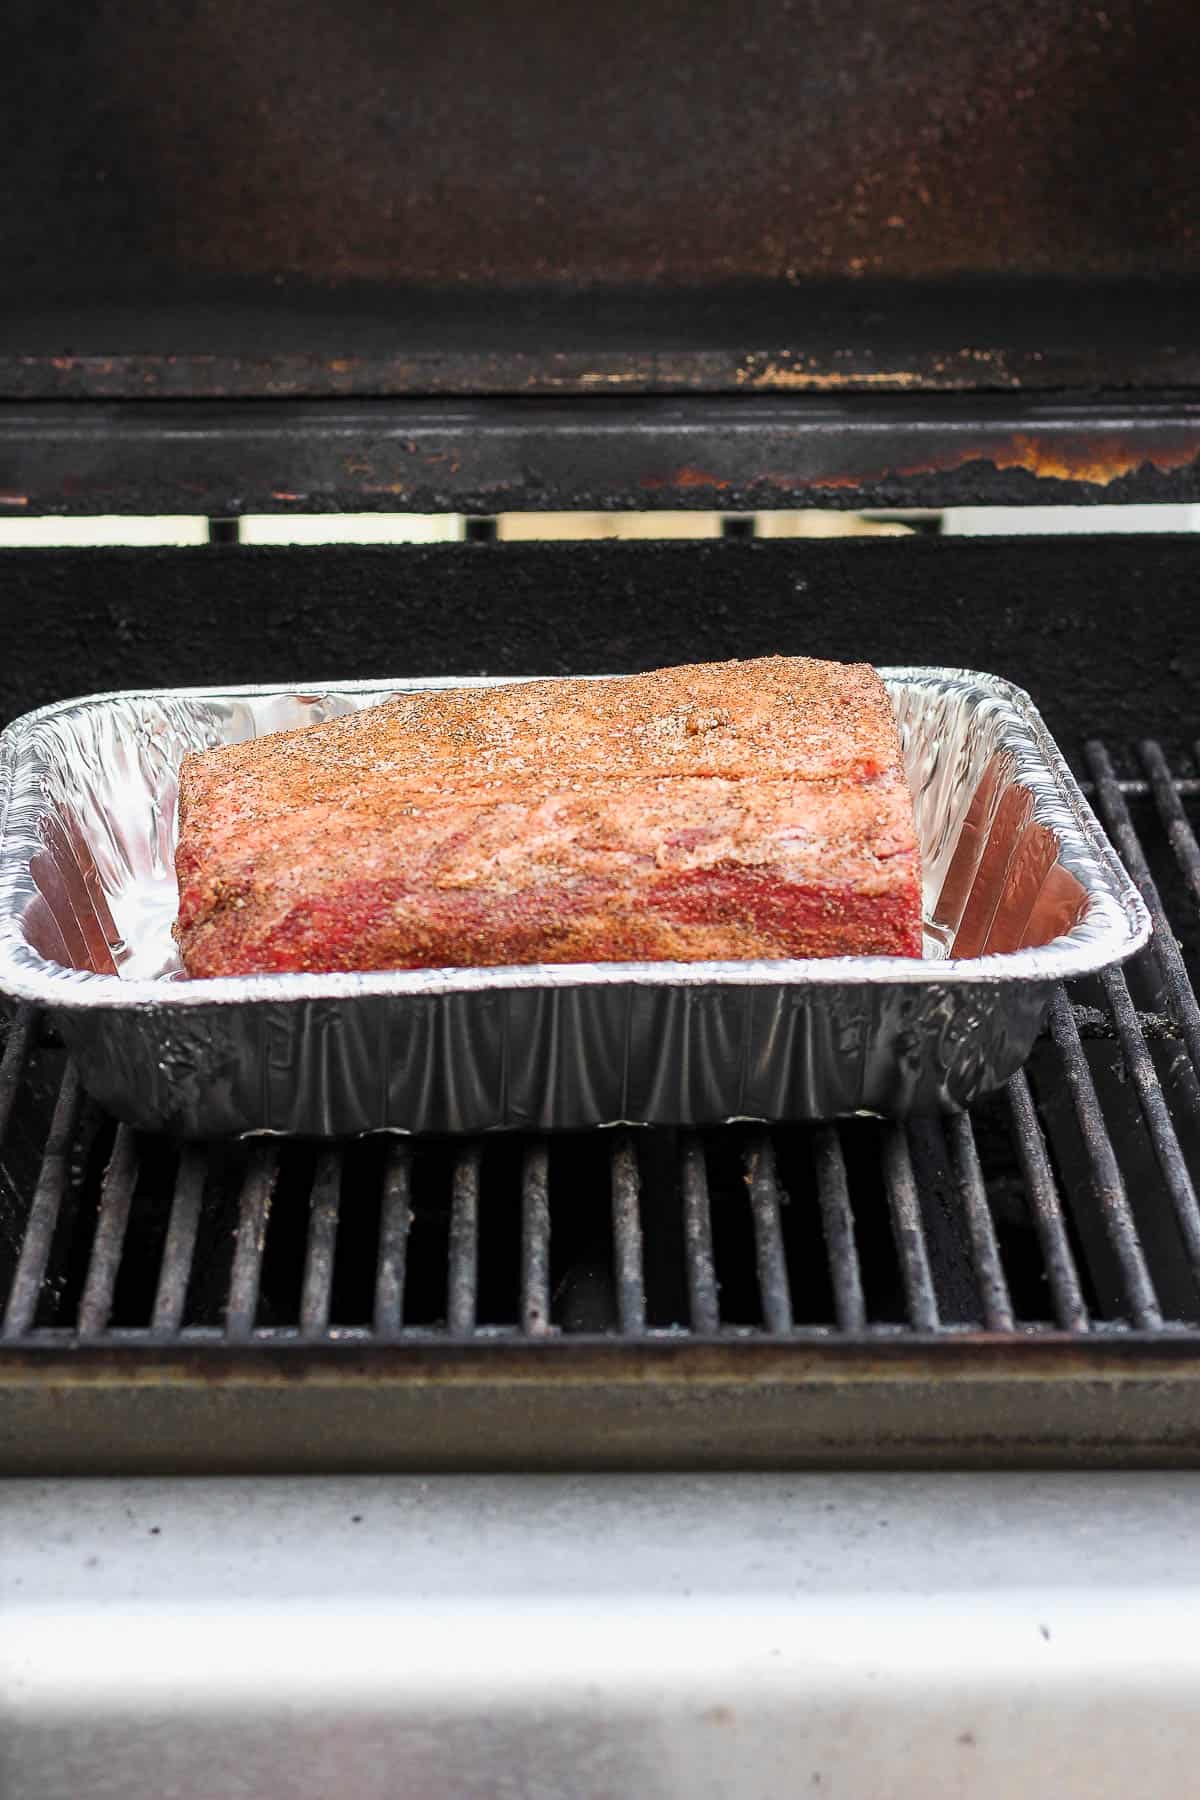 A seasoned prime rib in a foil basket on the grill.